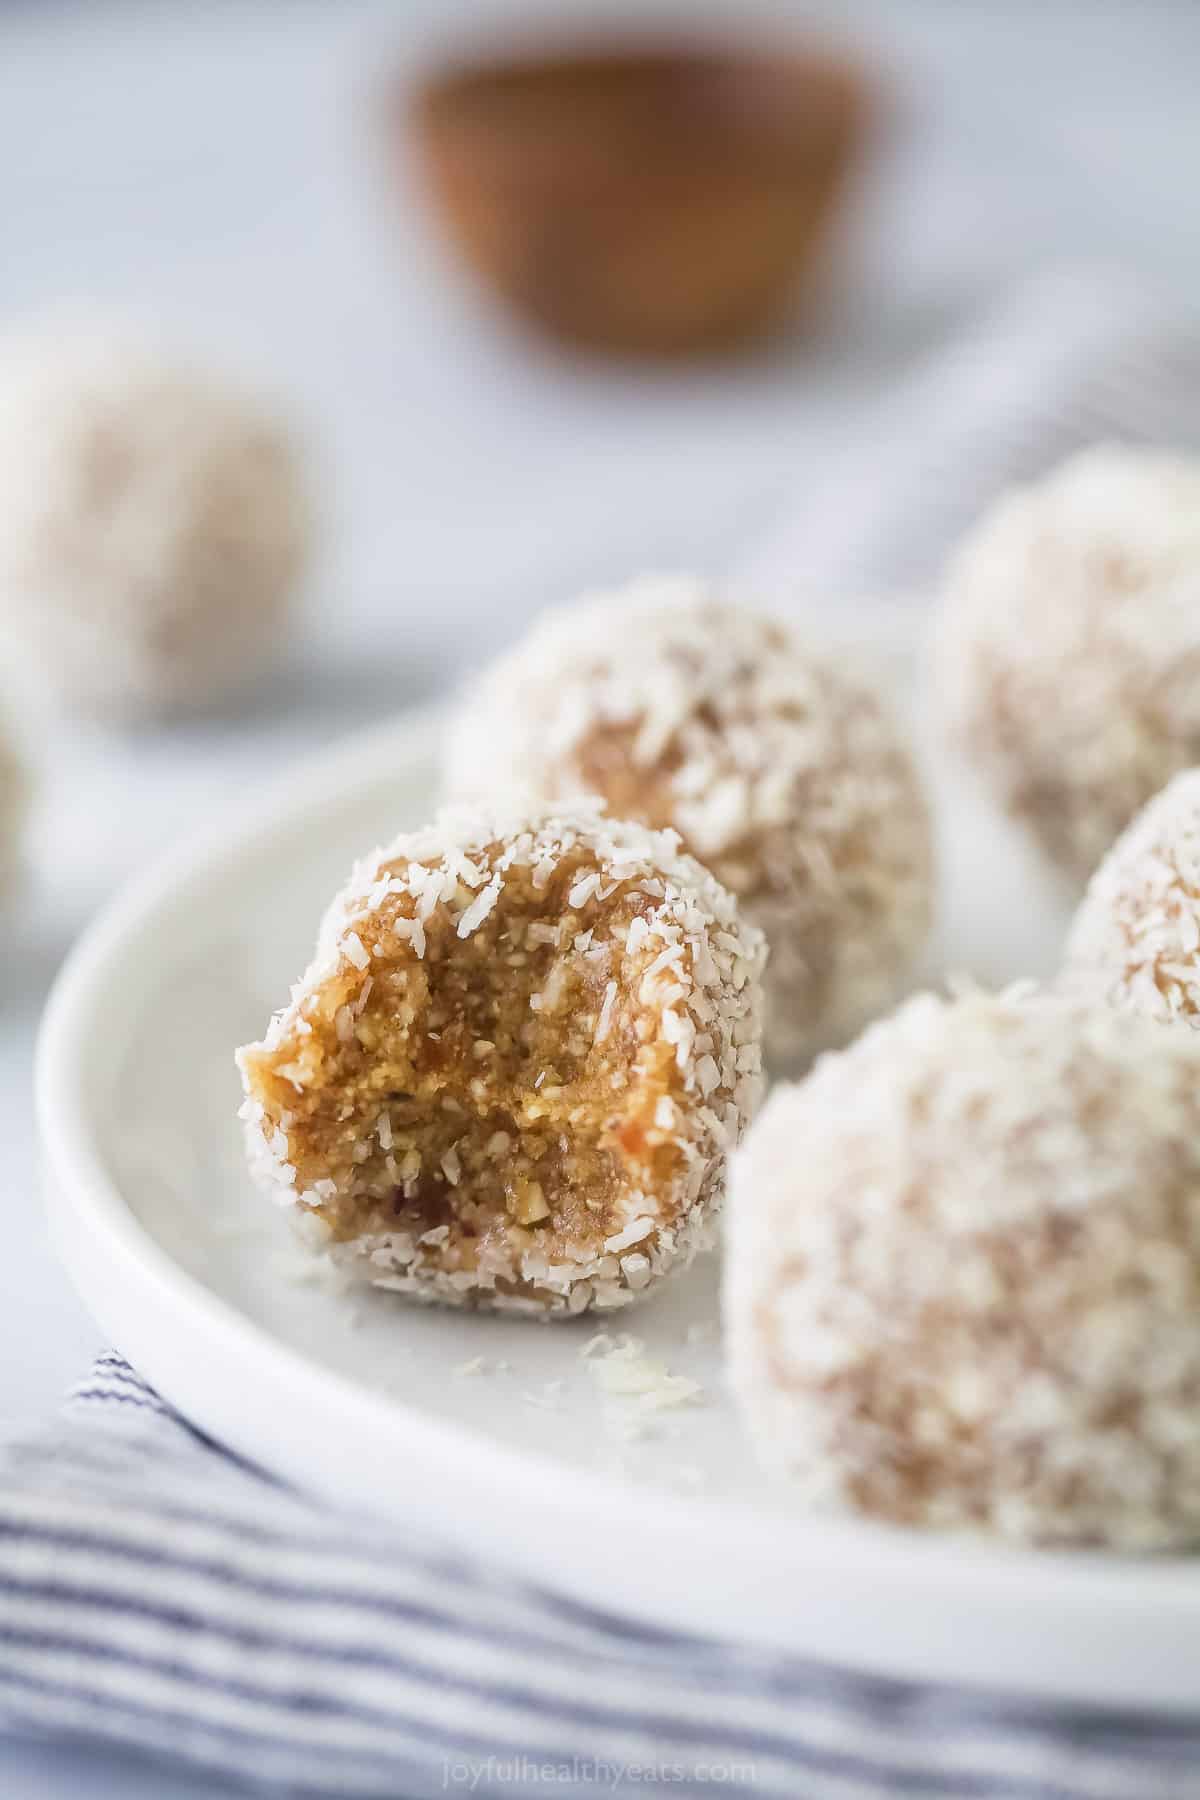 A close-up shot of coconut protein bites on a plate with the one in focus missing a bite